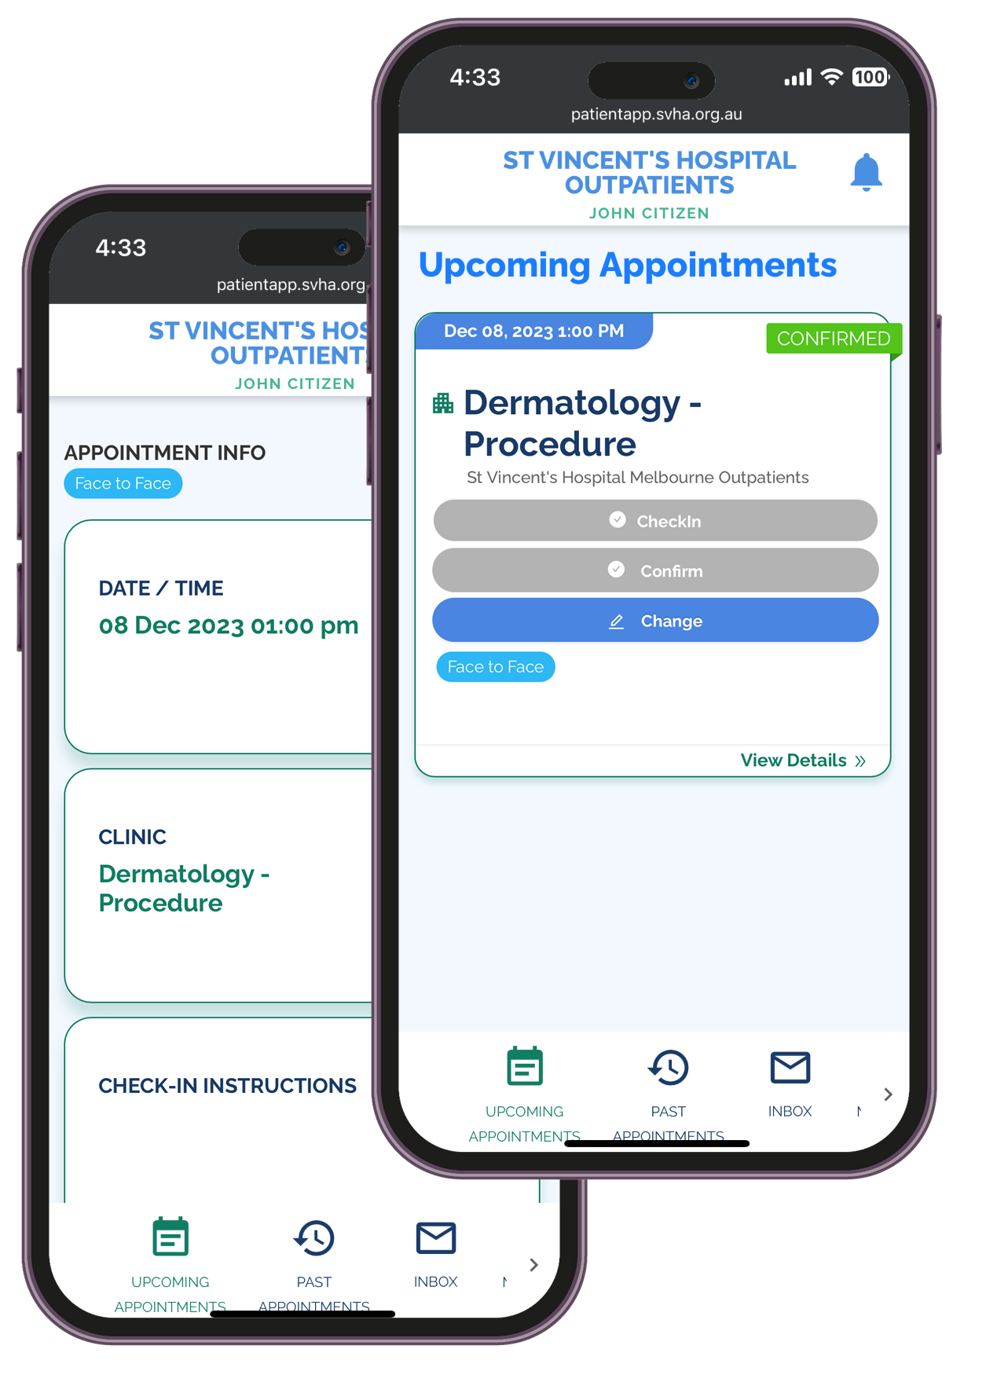 Patient App Screenshots - Upcoming appointments